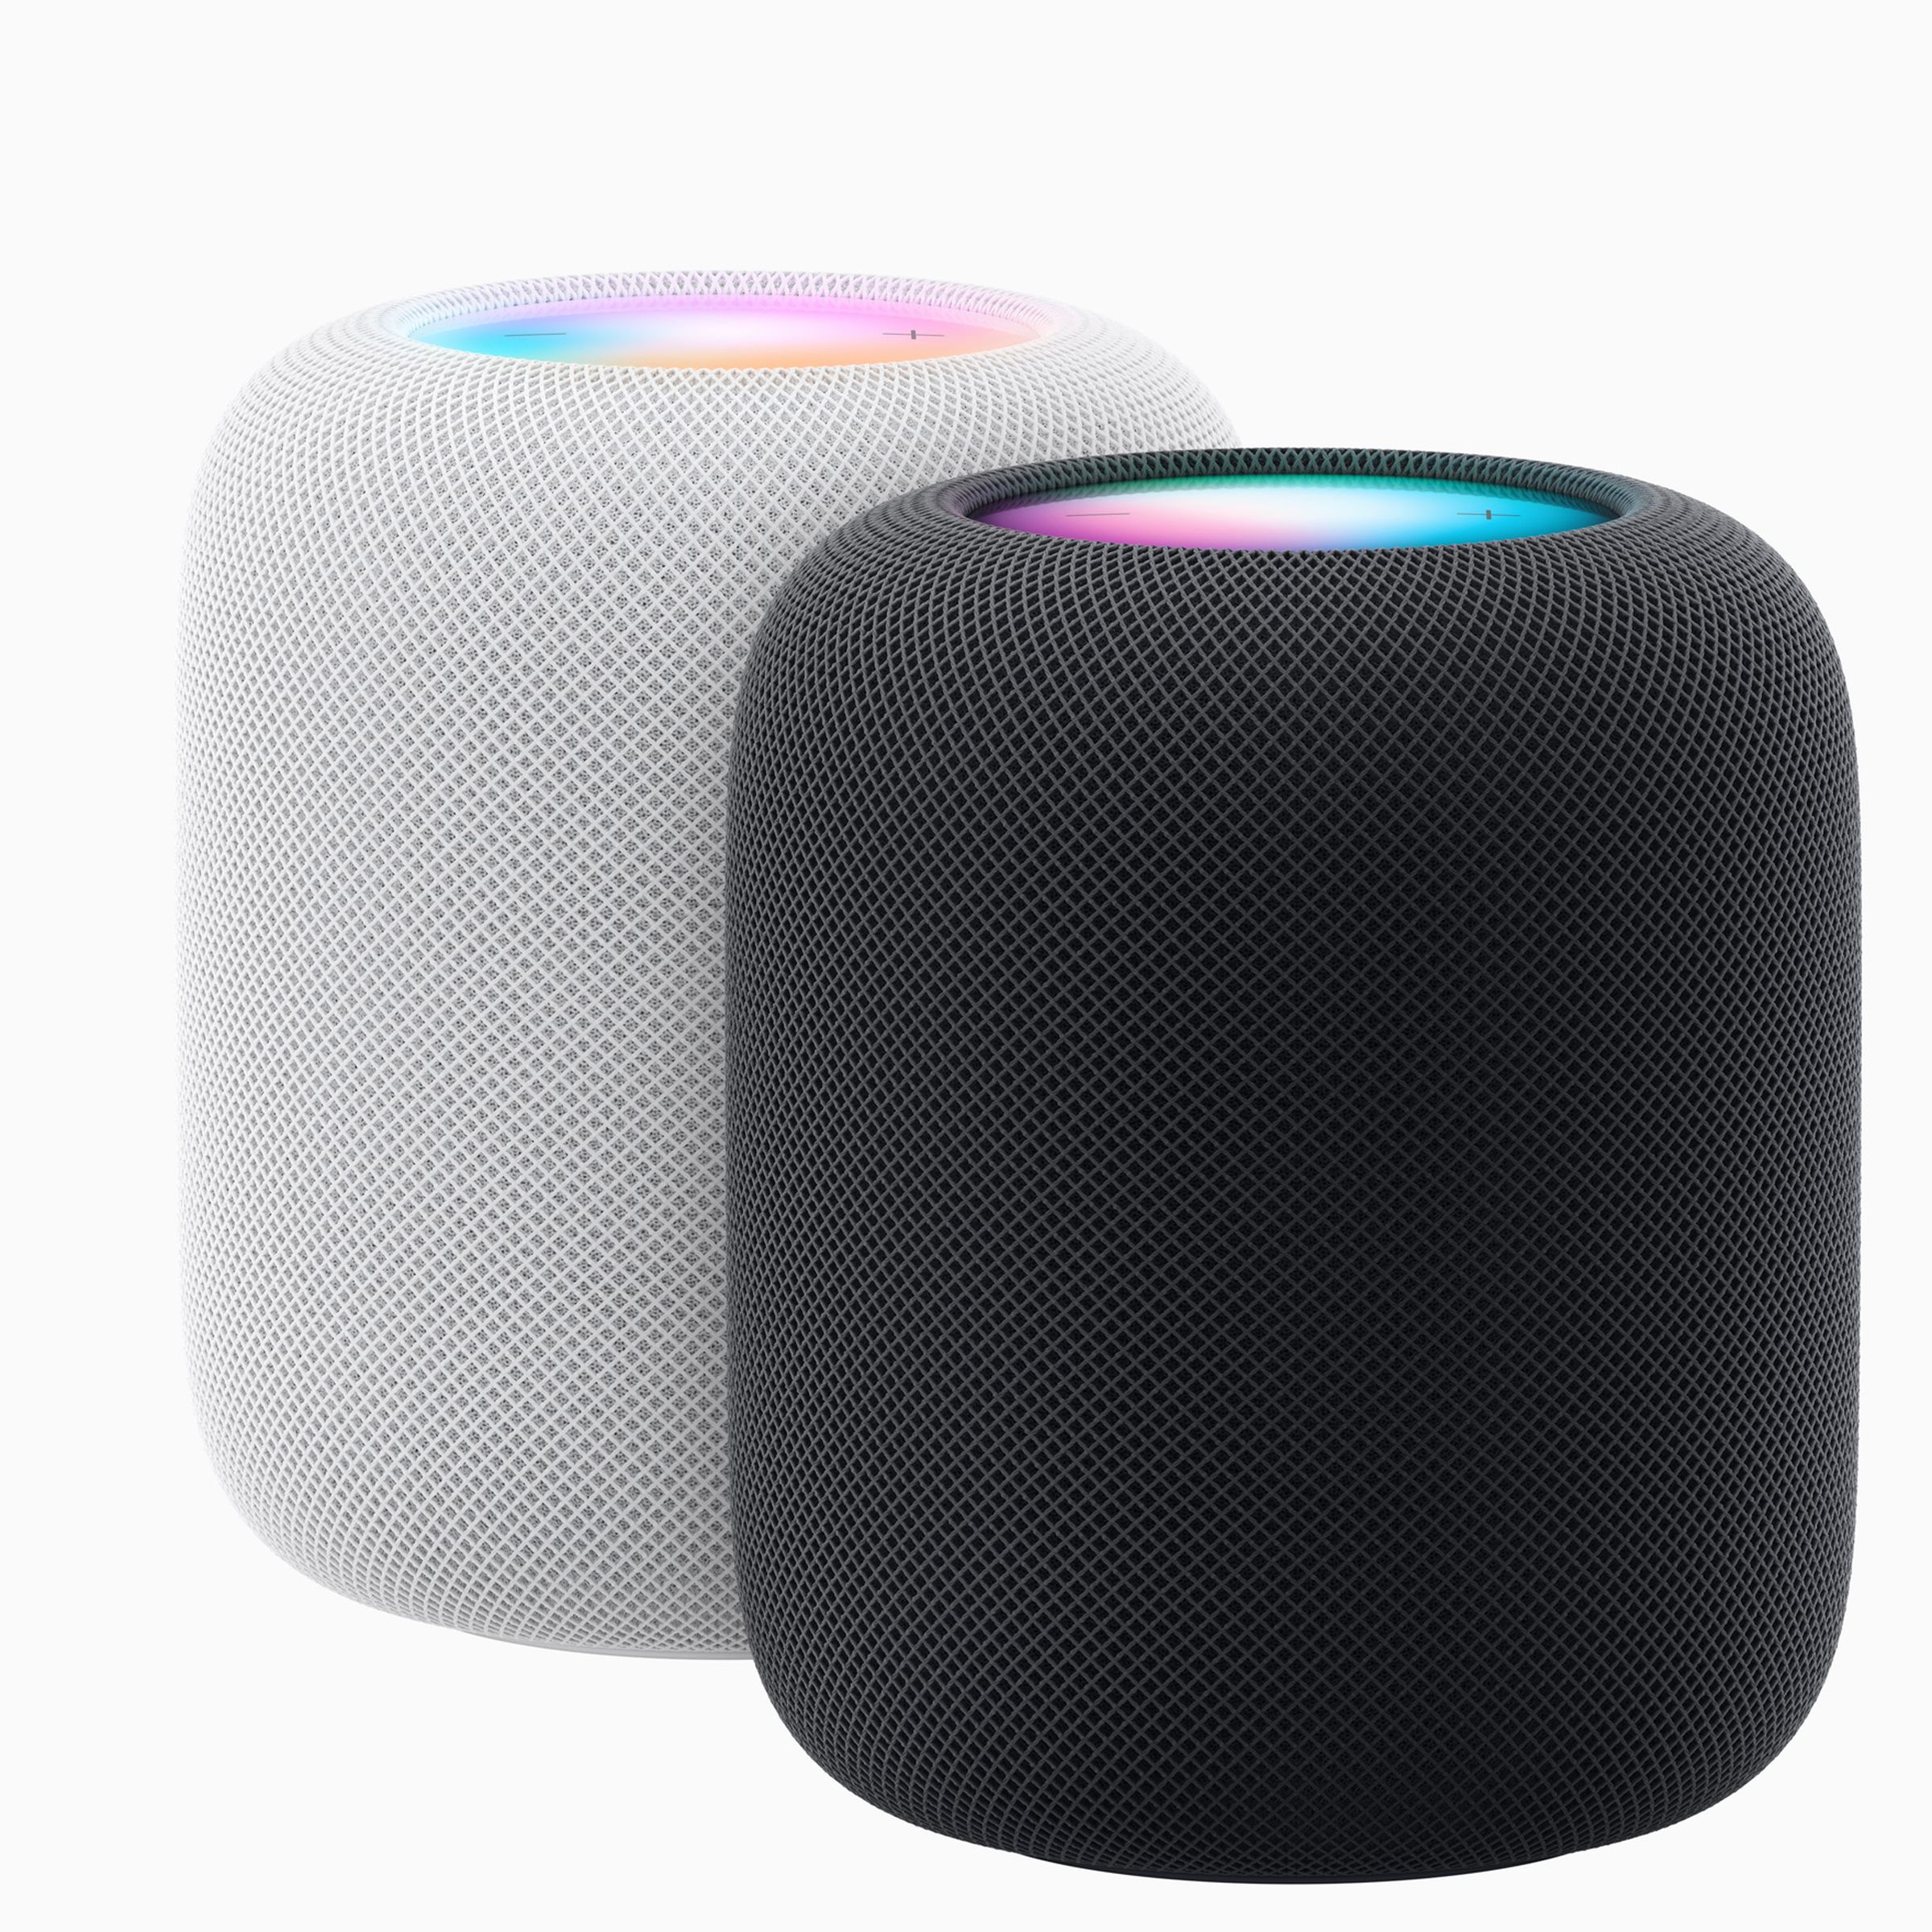 Two HomePods side by side.